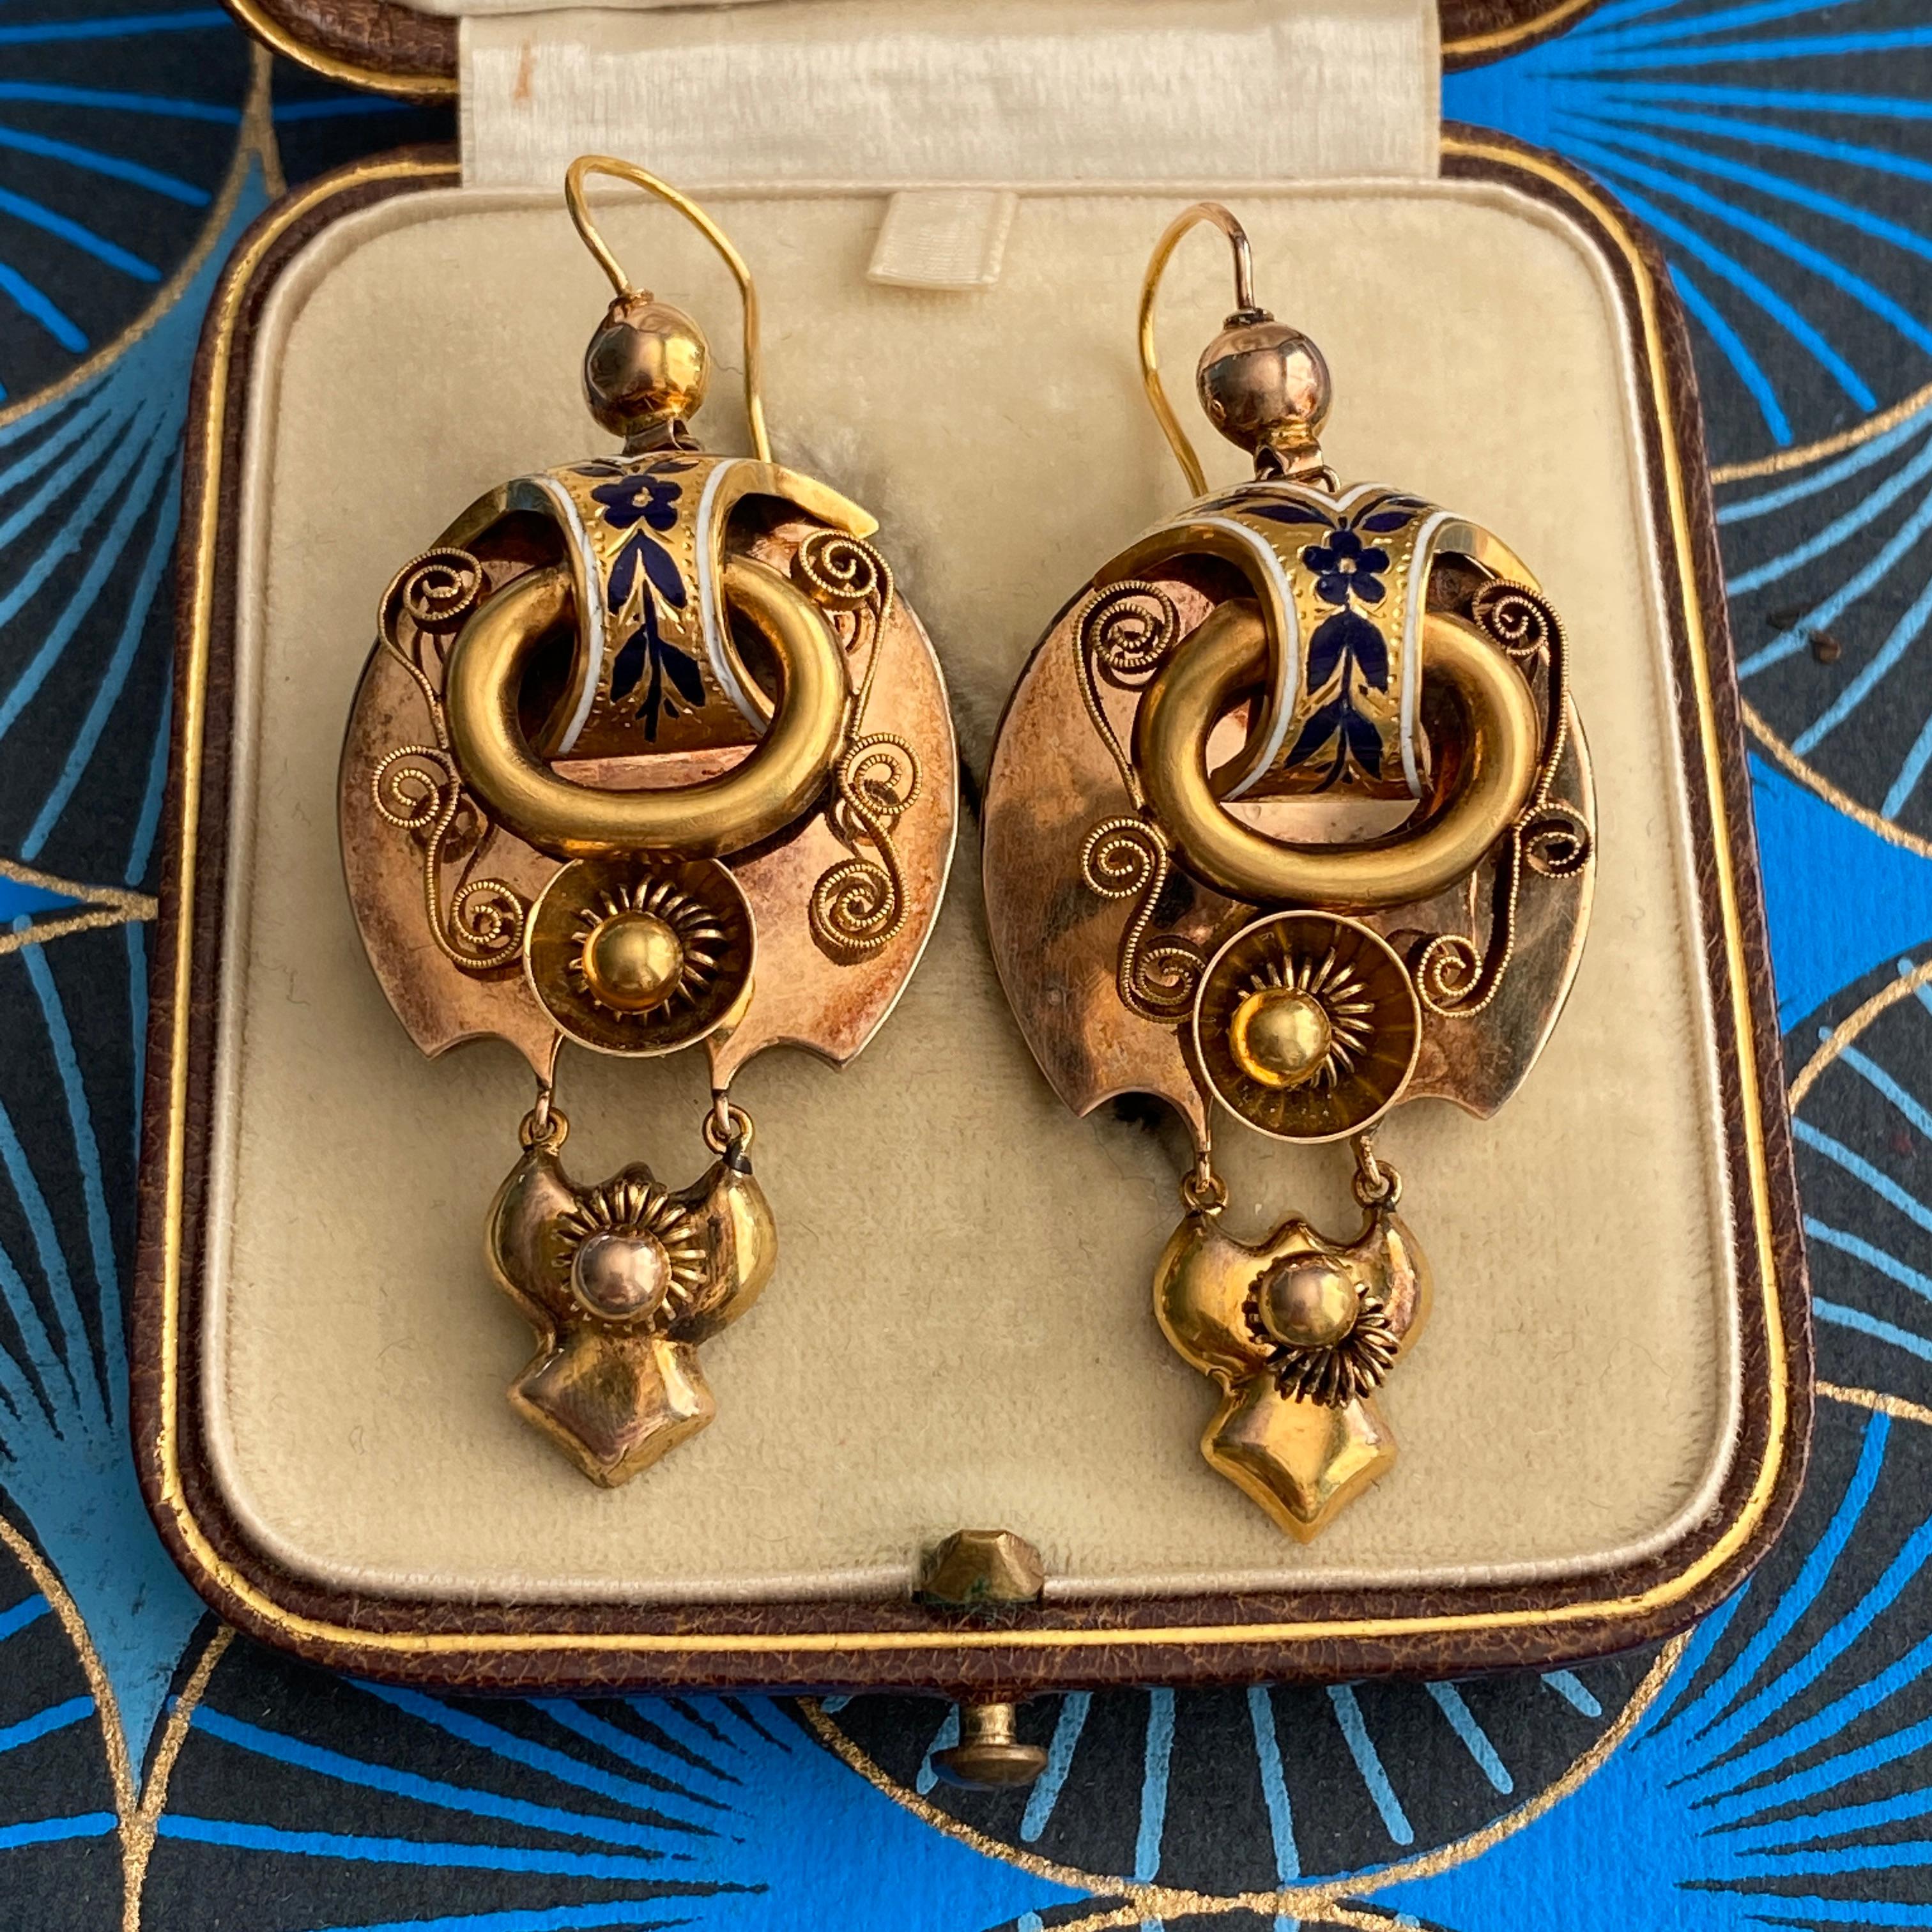 Details:
Fabulous pair of Antique Victorian 14K Gold Enamel Repousse Earrings from circa 1850-1860. These are truly stunning in person, with the glamour and style befitting a Victorian woman to wear to a formal ball, or a dinner party. They are 14K